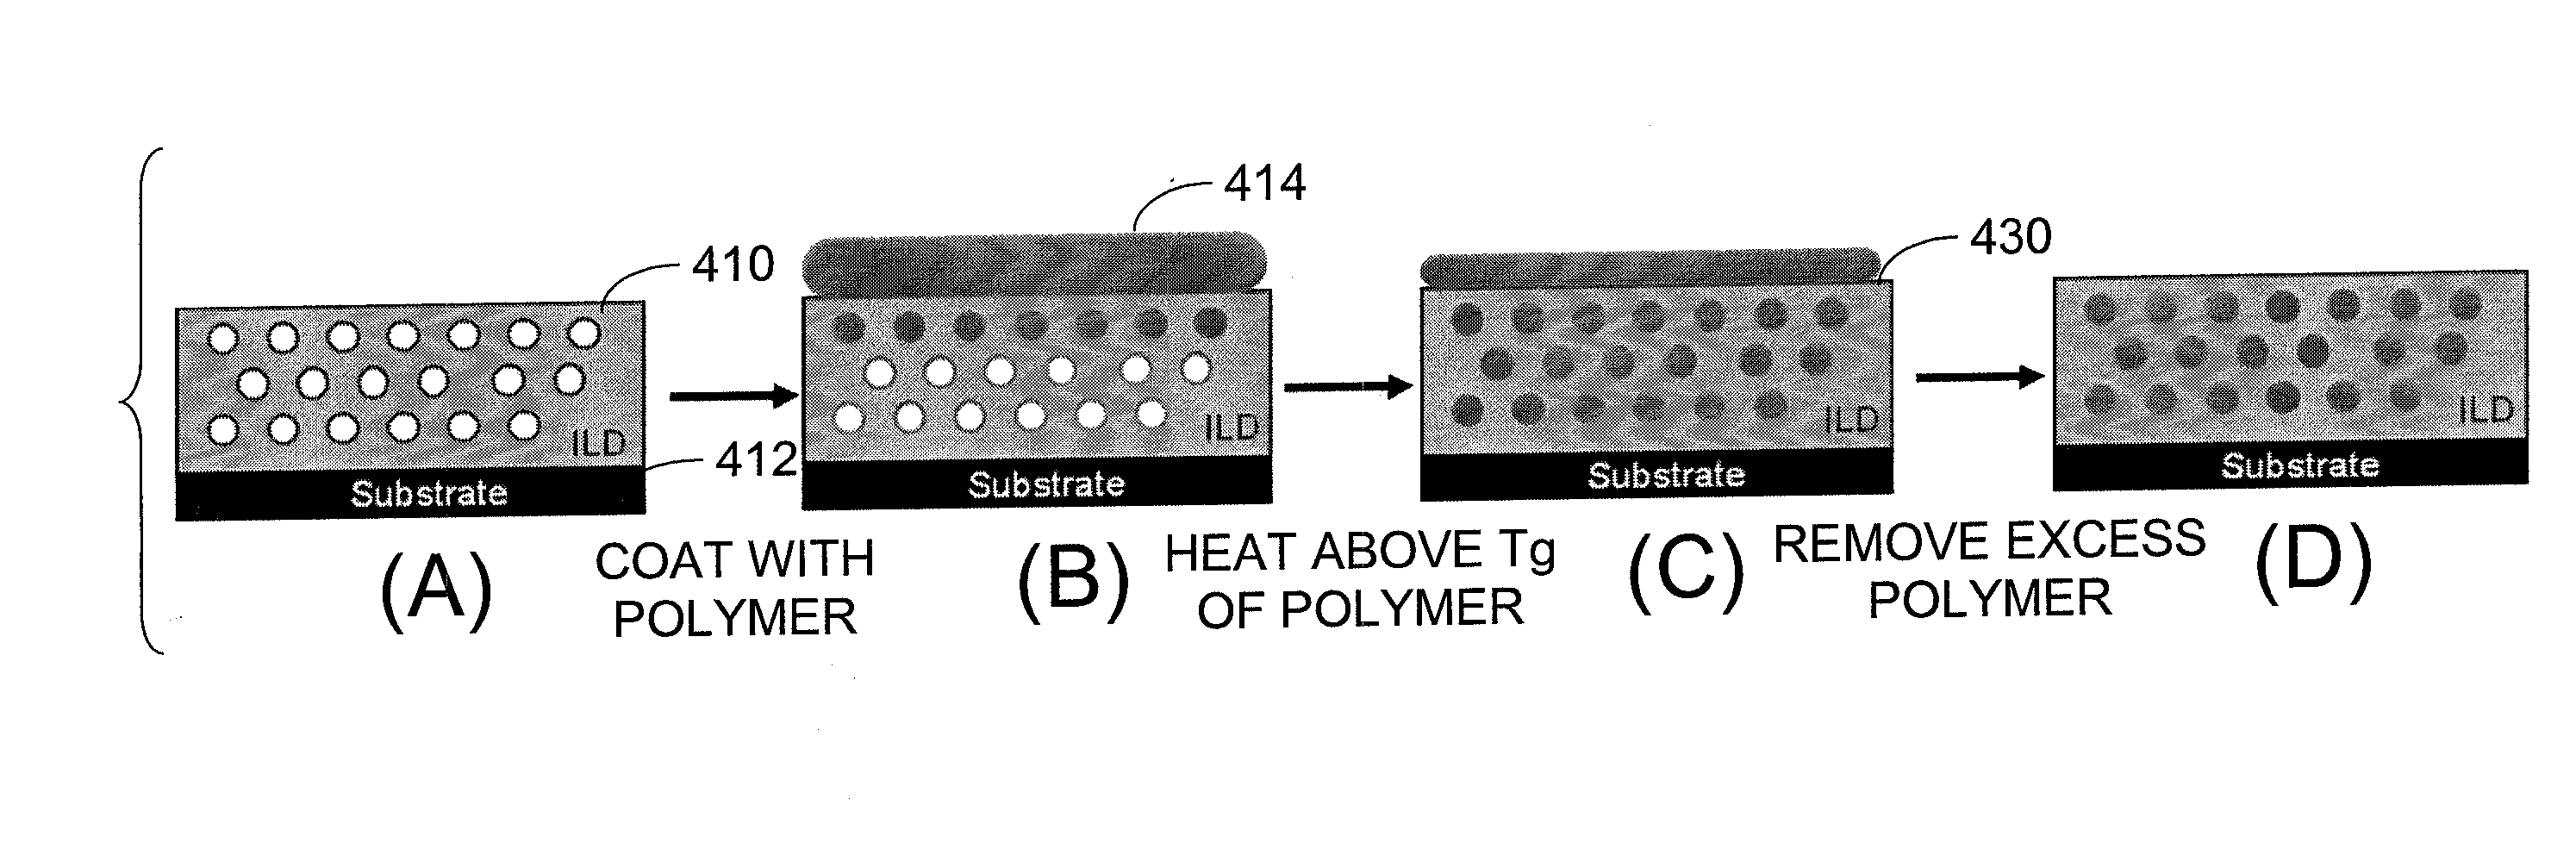 Reduction Of Pore Fill Material Dewetting